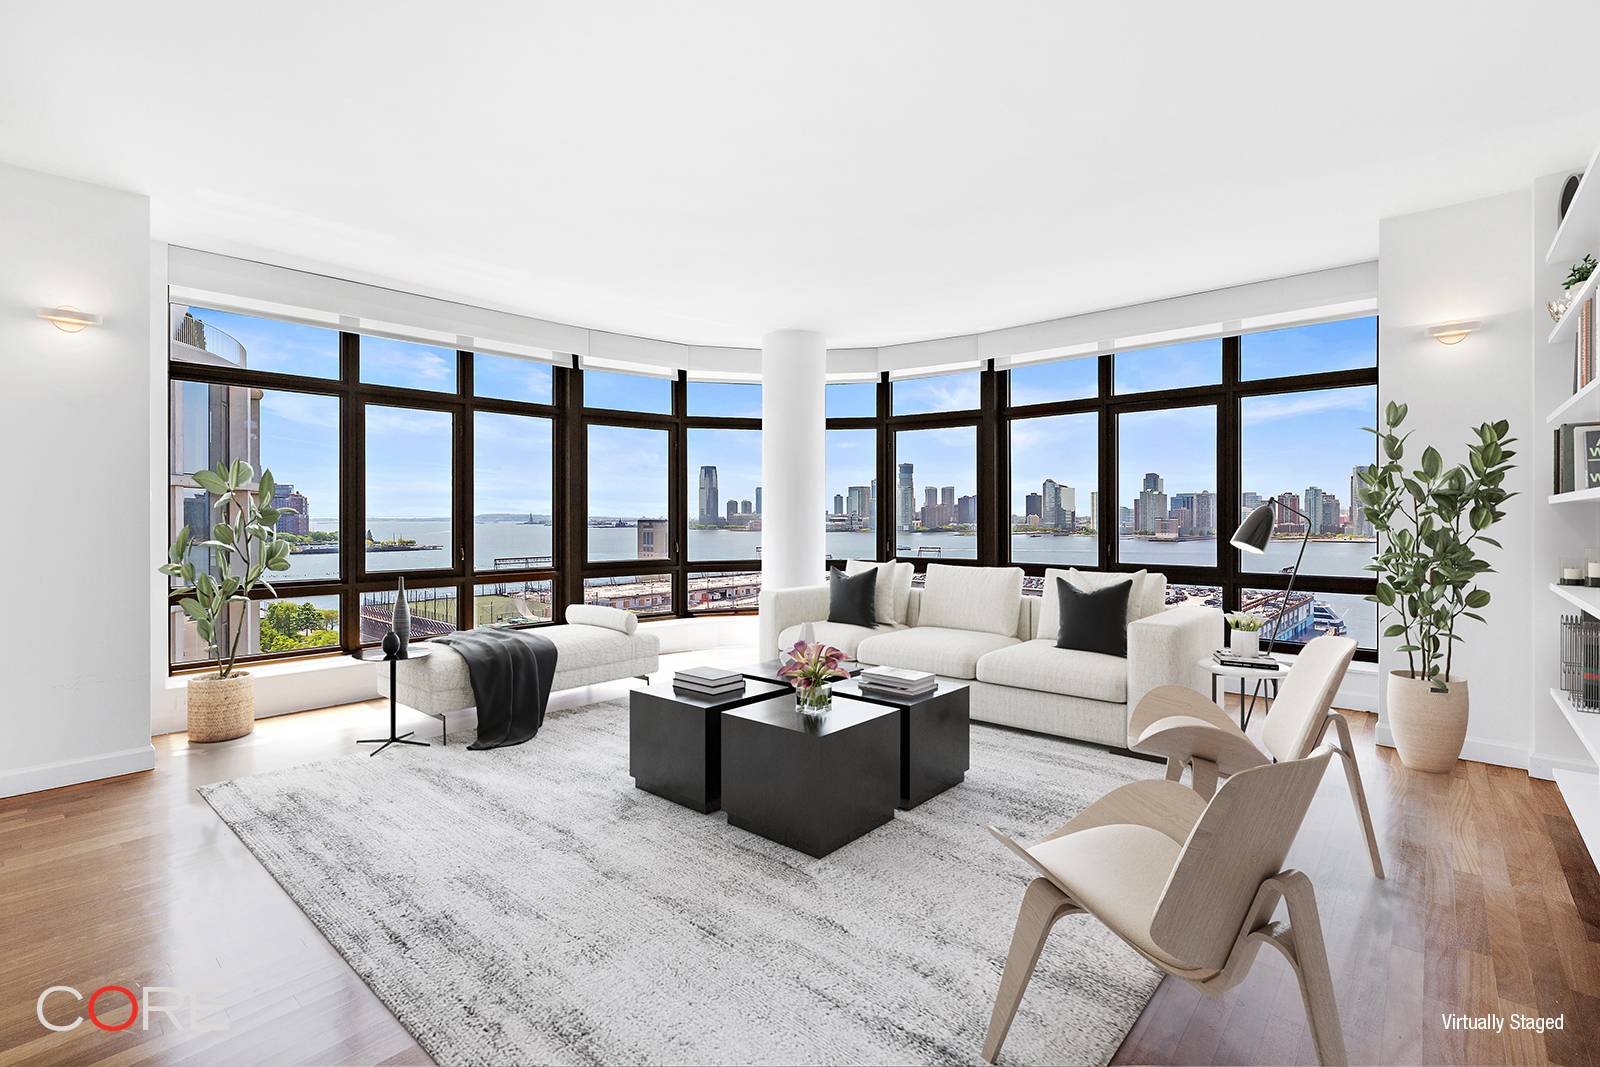 Enjoy spectacular sunset views overlooking the Hudson River from this stunning three bedroom, three and a half bath corner residence in the heart of the West Village.